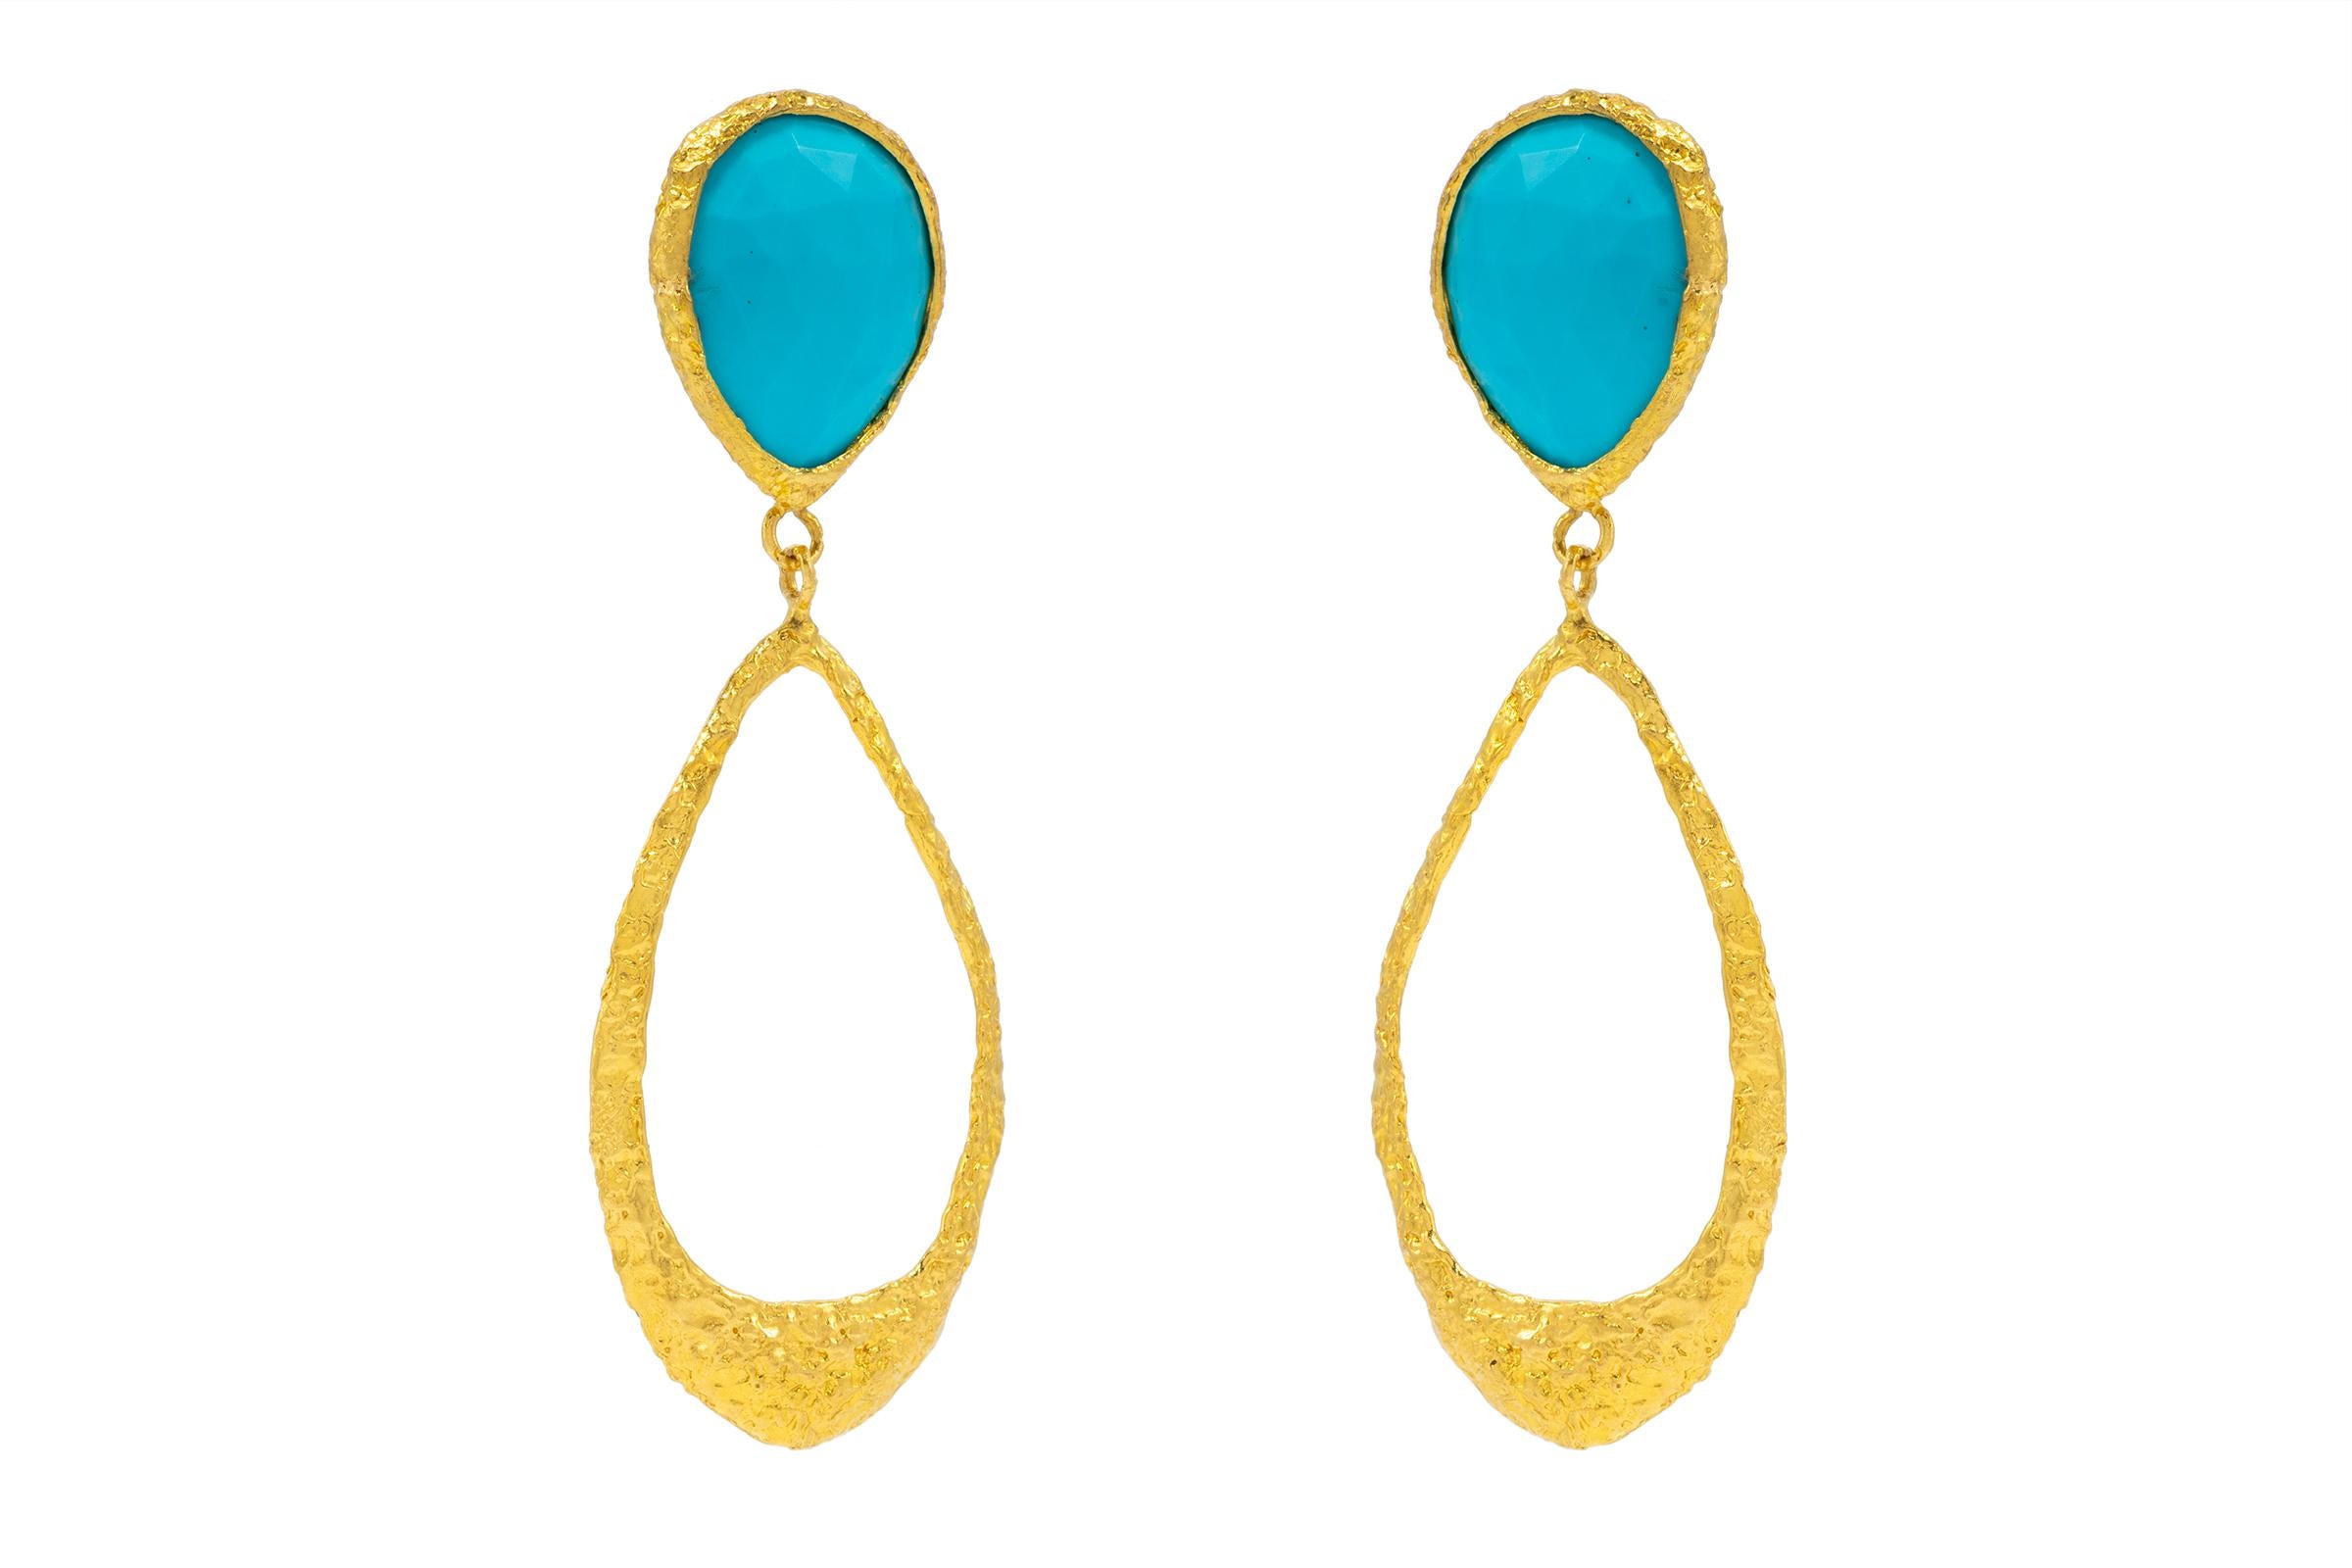 Pear Cut Tagili Signature Teardrop Earrings with Turquoise in 22k Gold For Sale